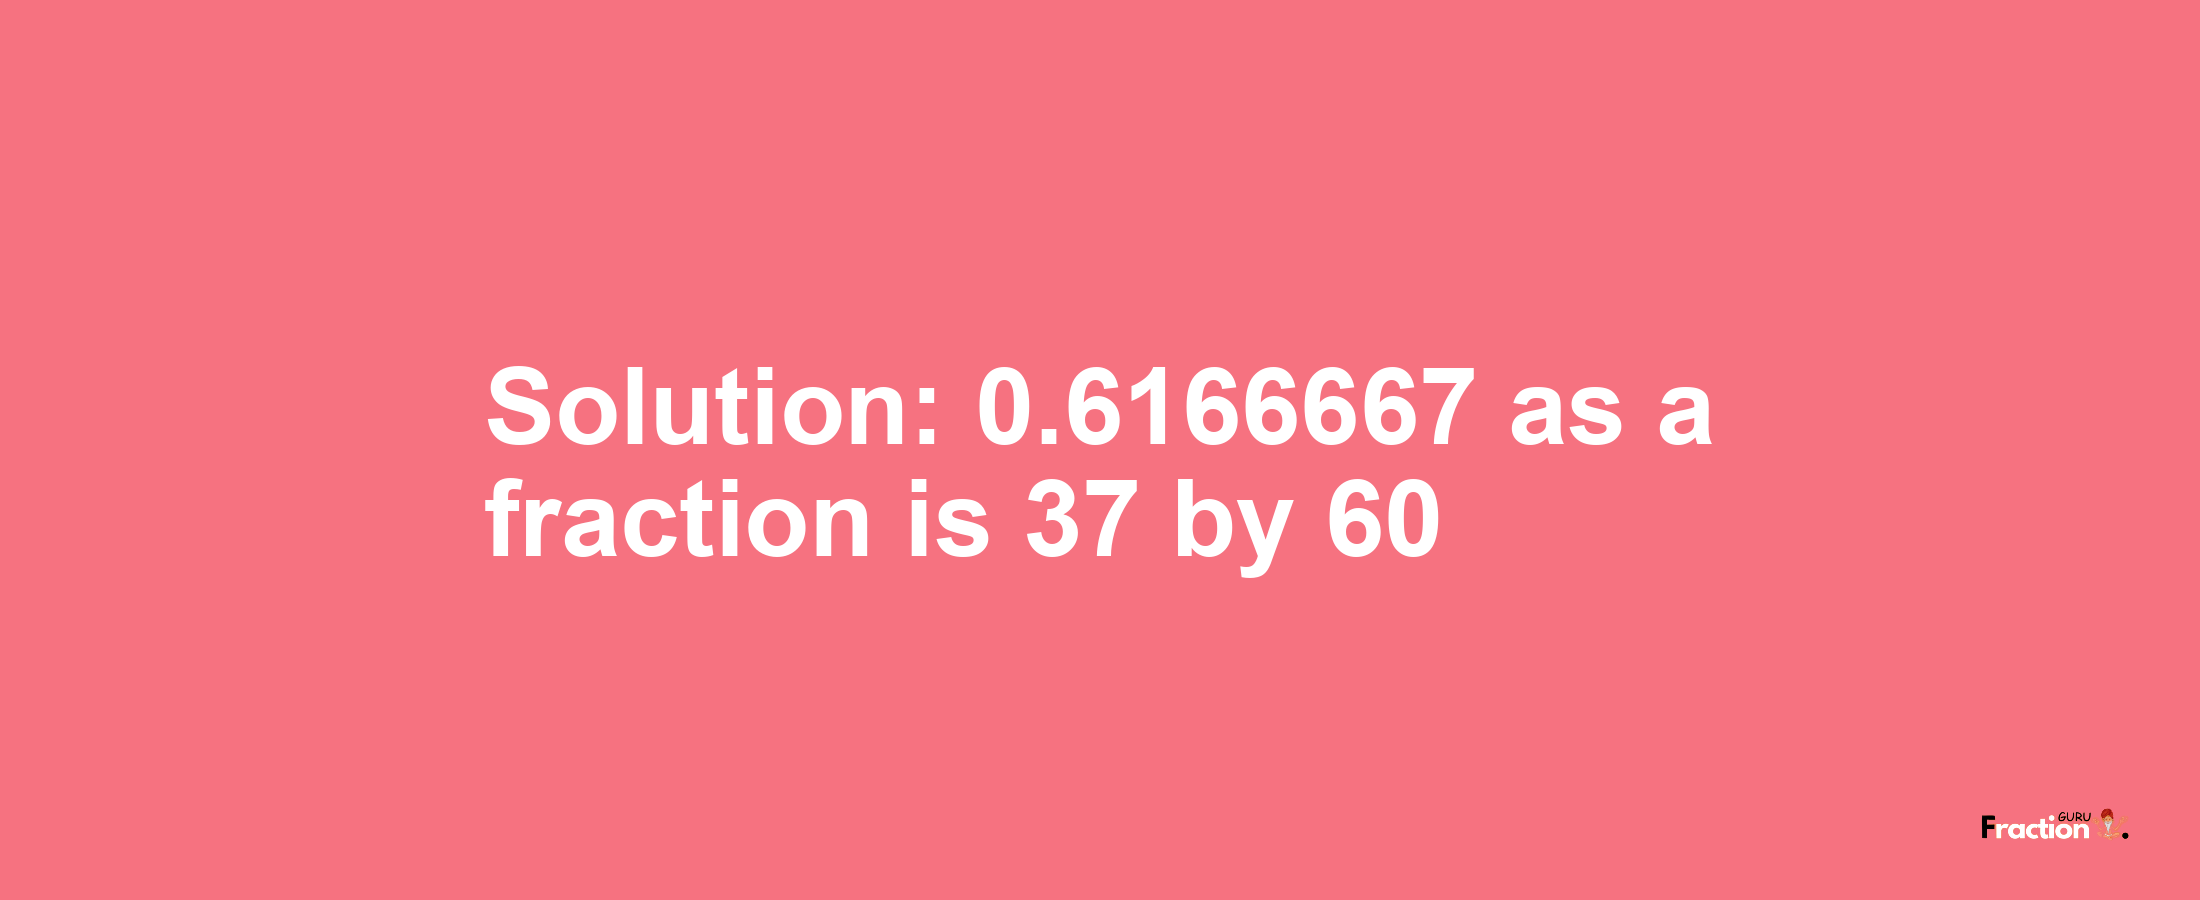 Solution:0.6166667 as a fraction is 37/60